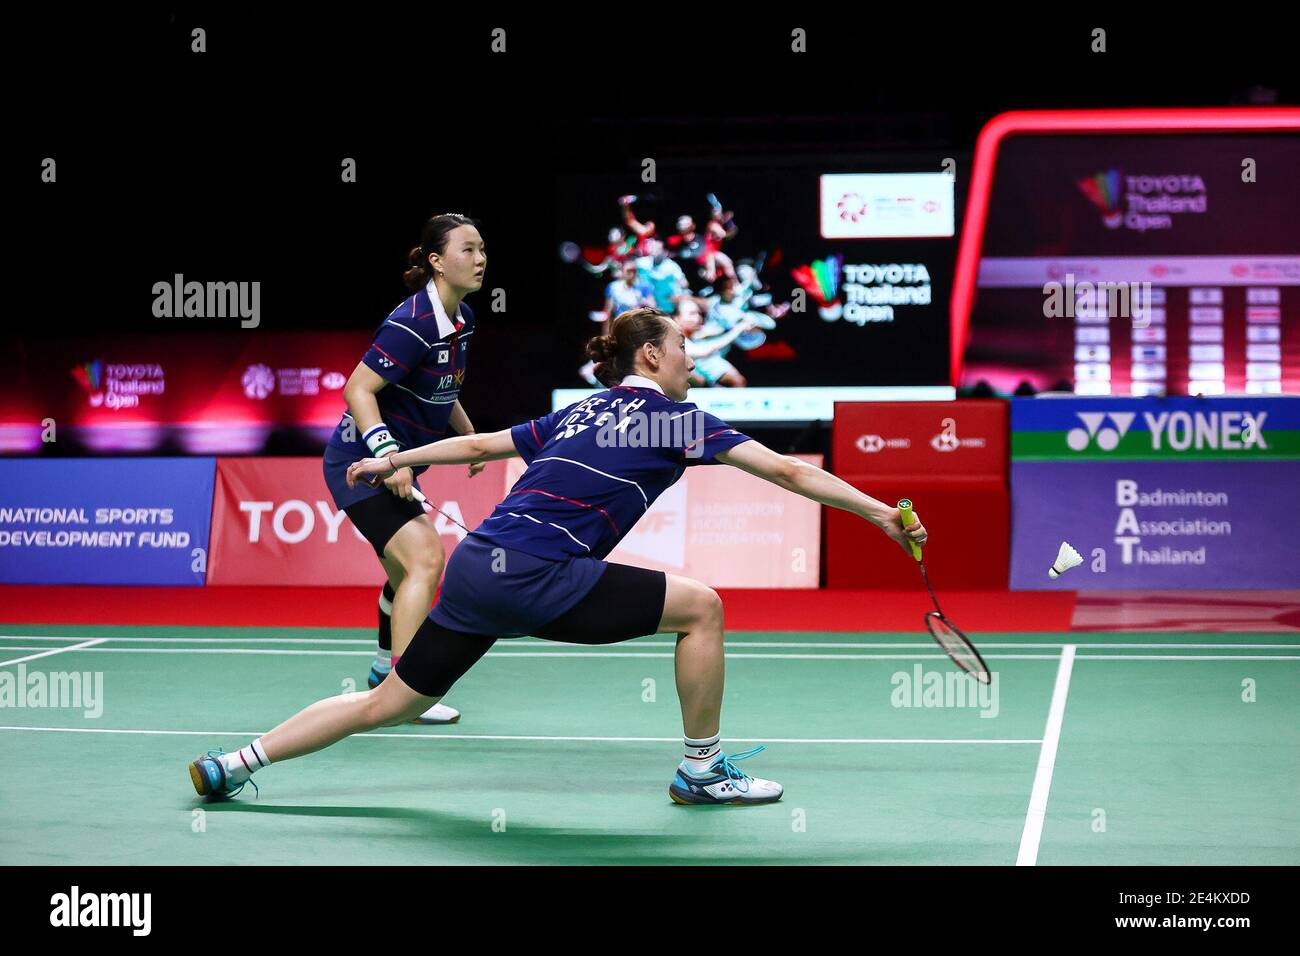 210124) -- BANGKOK, Jan. 24, 2021 (Xinhua) -- Lee So-Hee (front) and Shin  Seung-Chan of South Korea compete during the final of women's doubles  against their compatriots Kim So-Yeong and Kong Hee-Yong